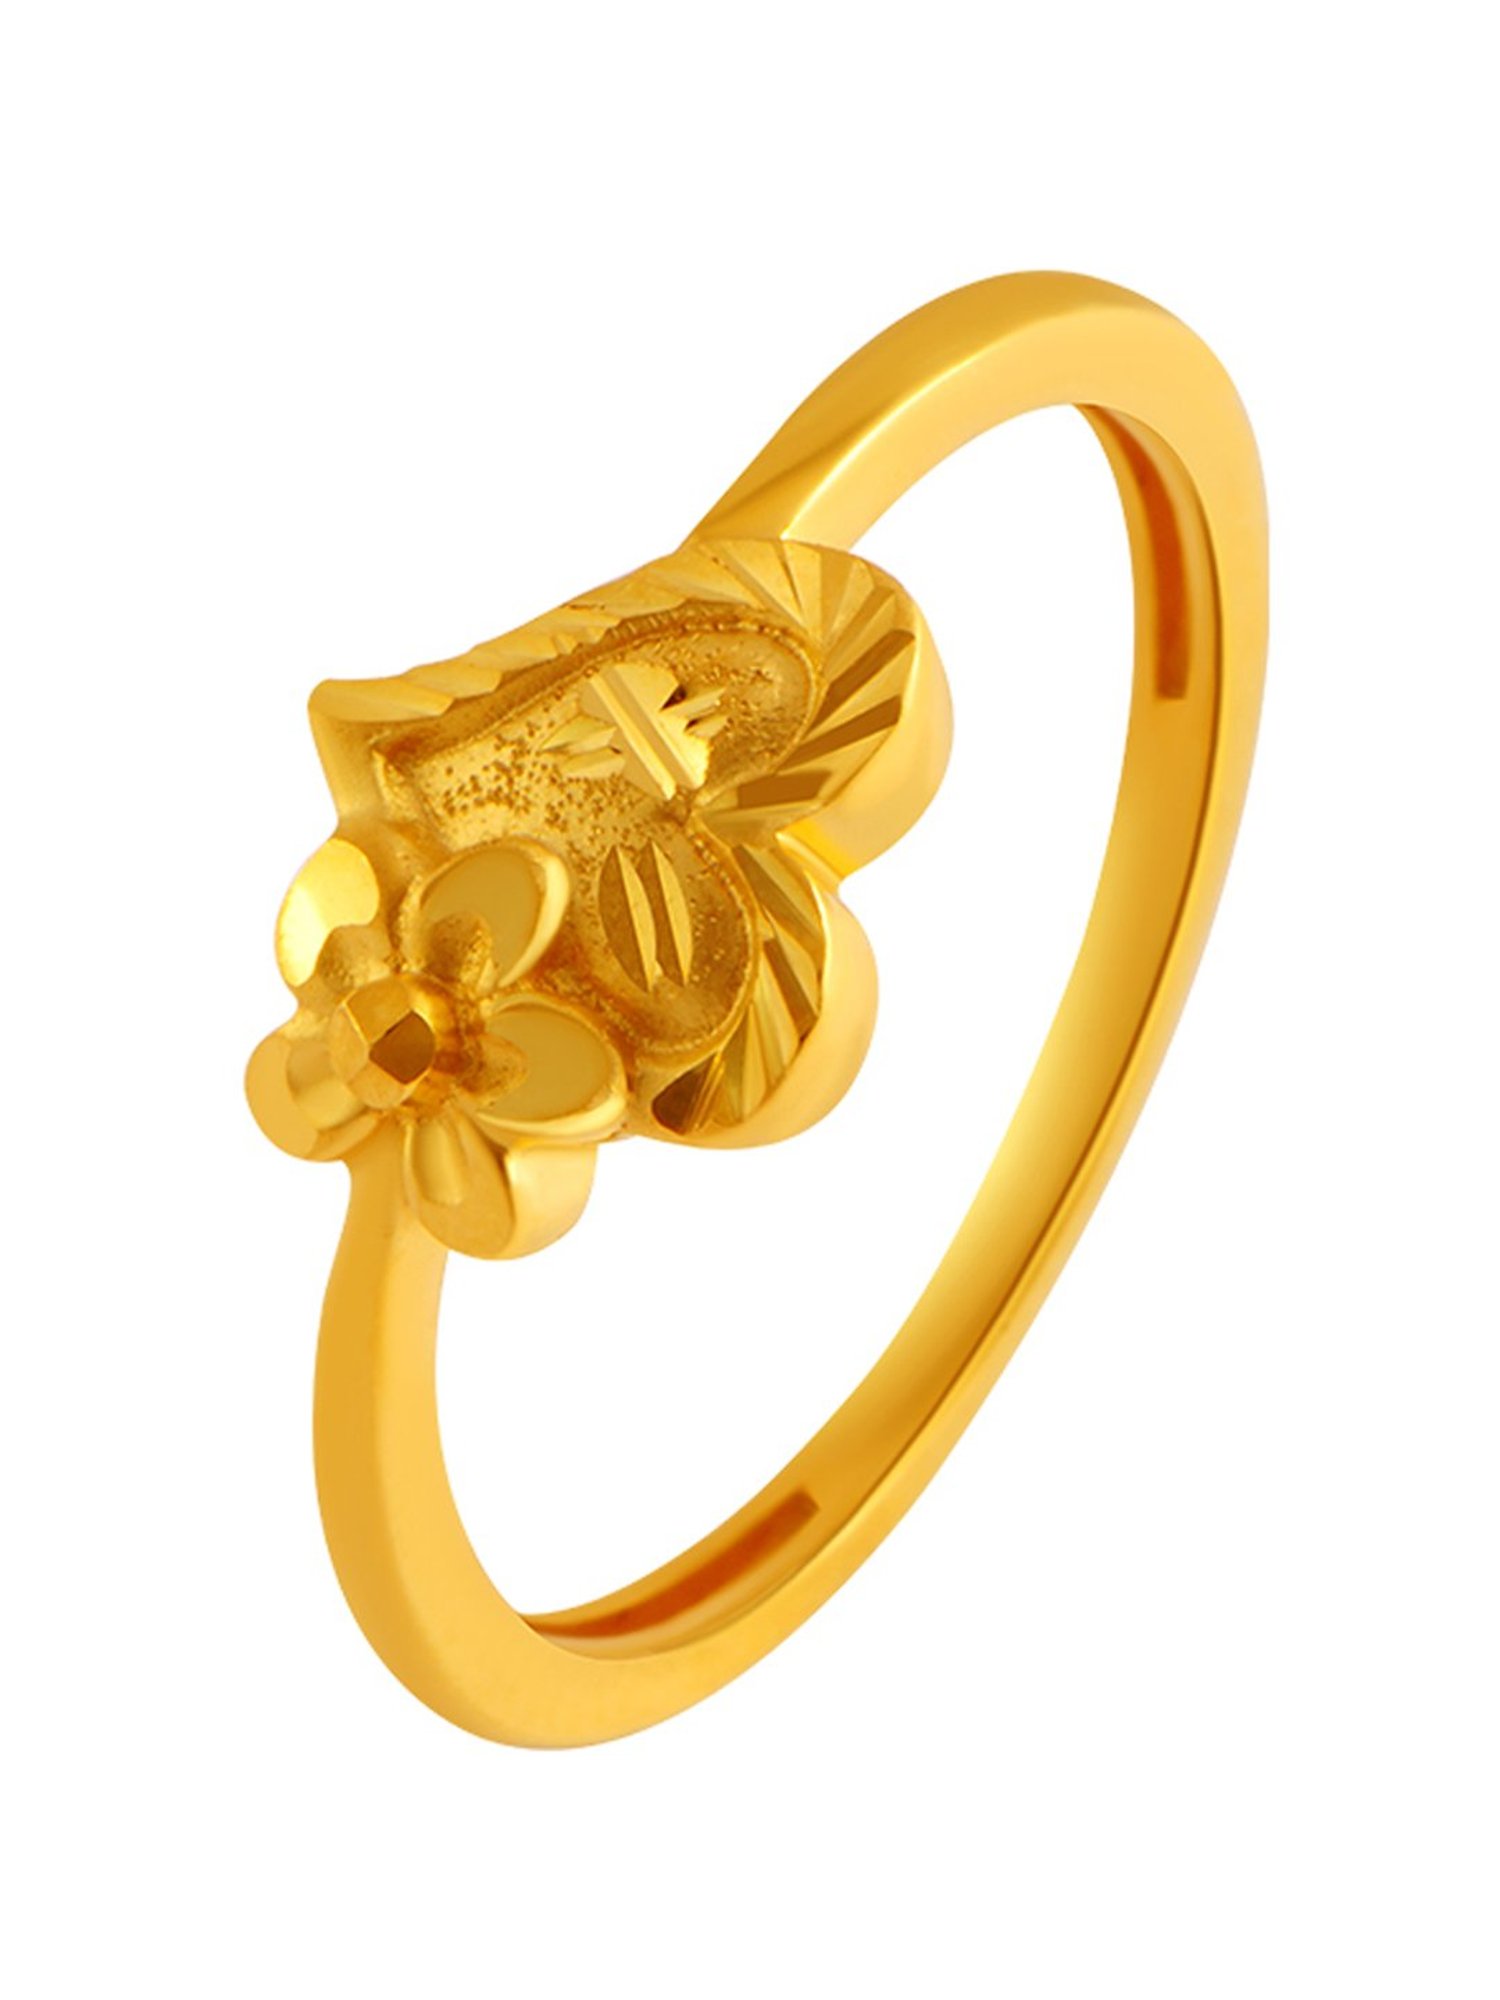 PC Chandra Jewellers Embded With Finest Quality Stones 14kt Yellow Gold ring  Price in India - Buy PC Chandra Jewellers Embded With Finest Quality Stones  14kt Yellow Gold ring online at Flipkart.com